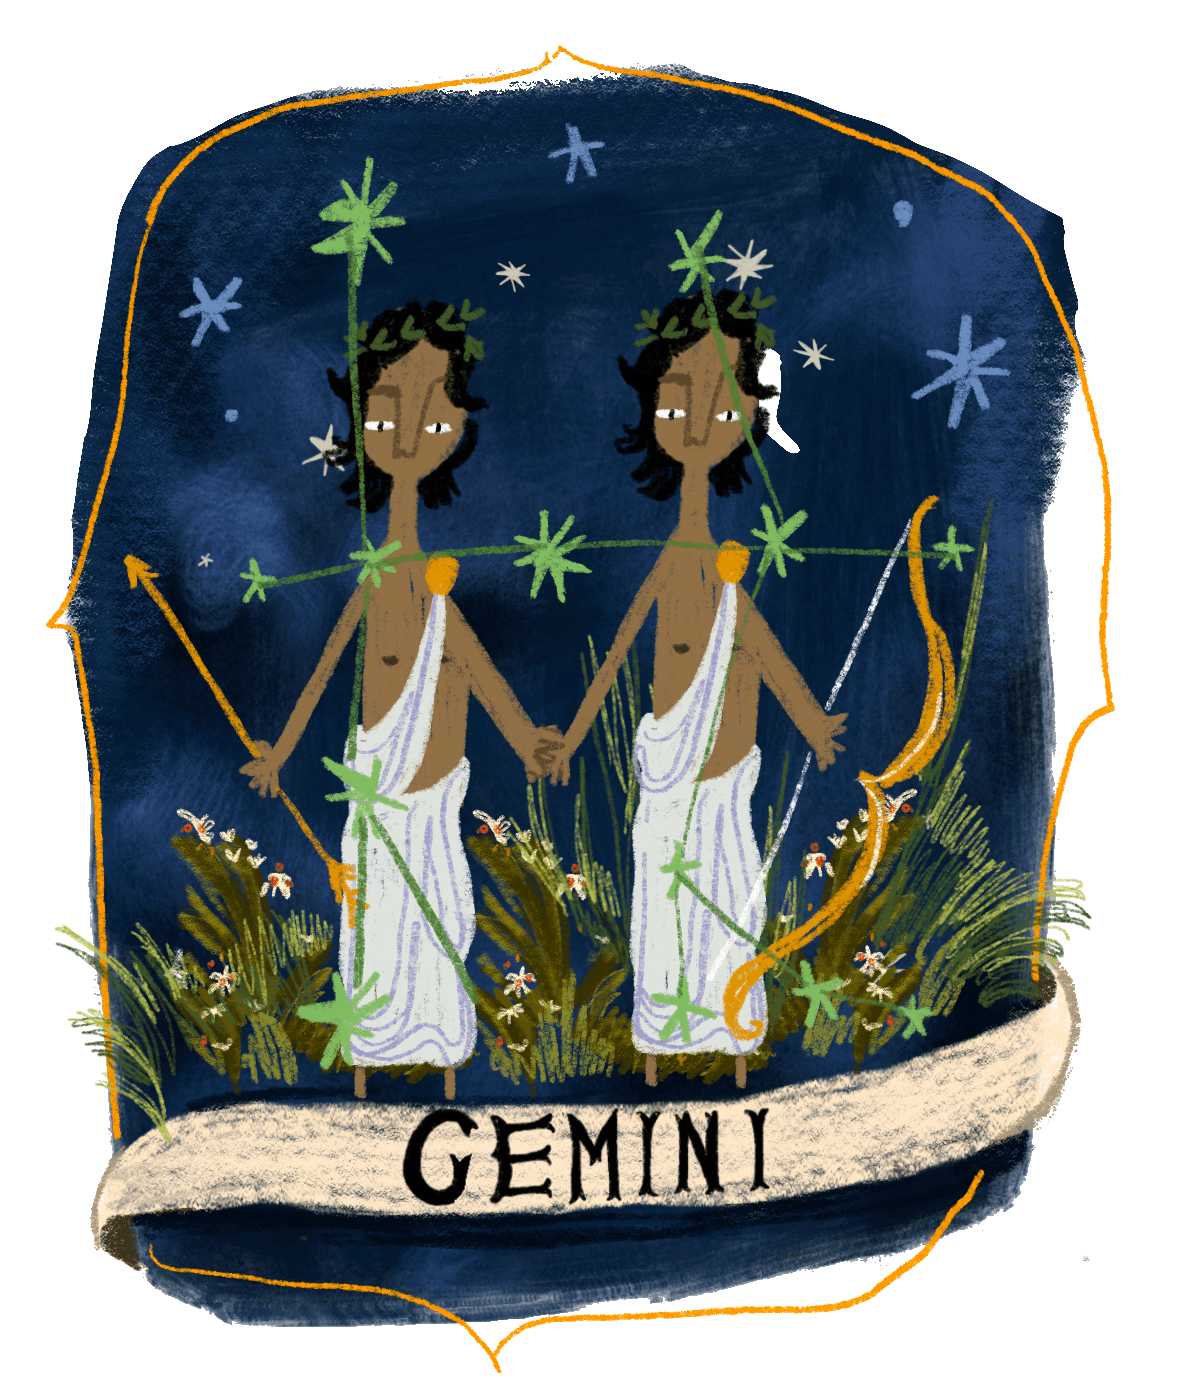 An illustration of the Gemini star sign.